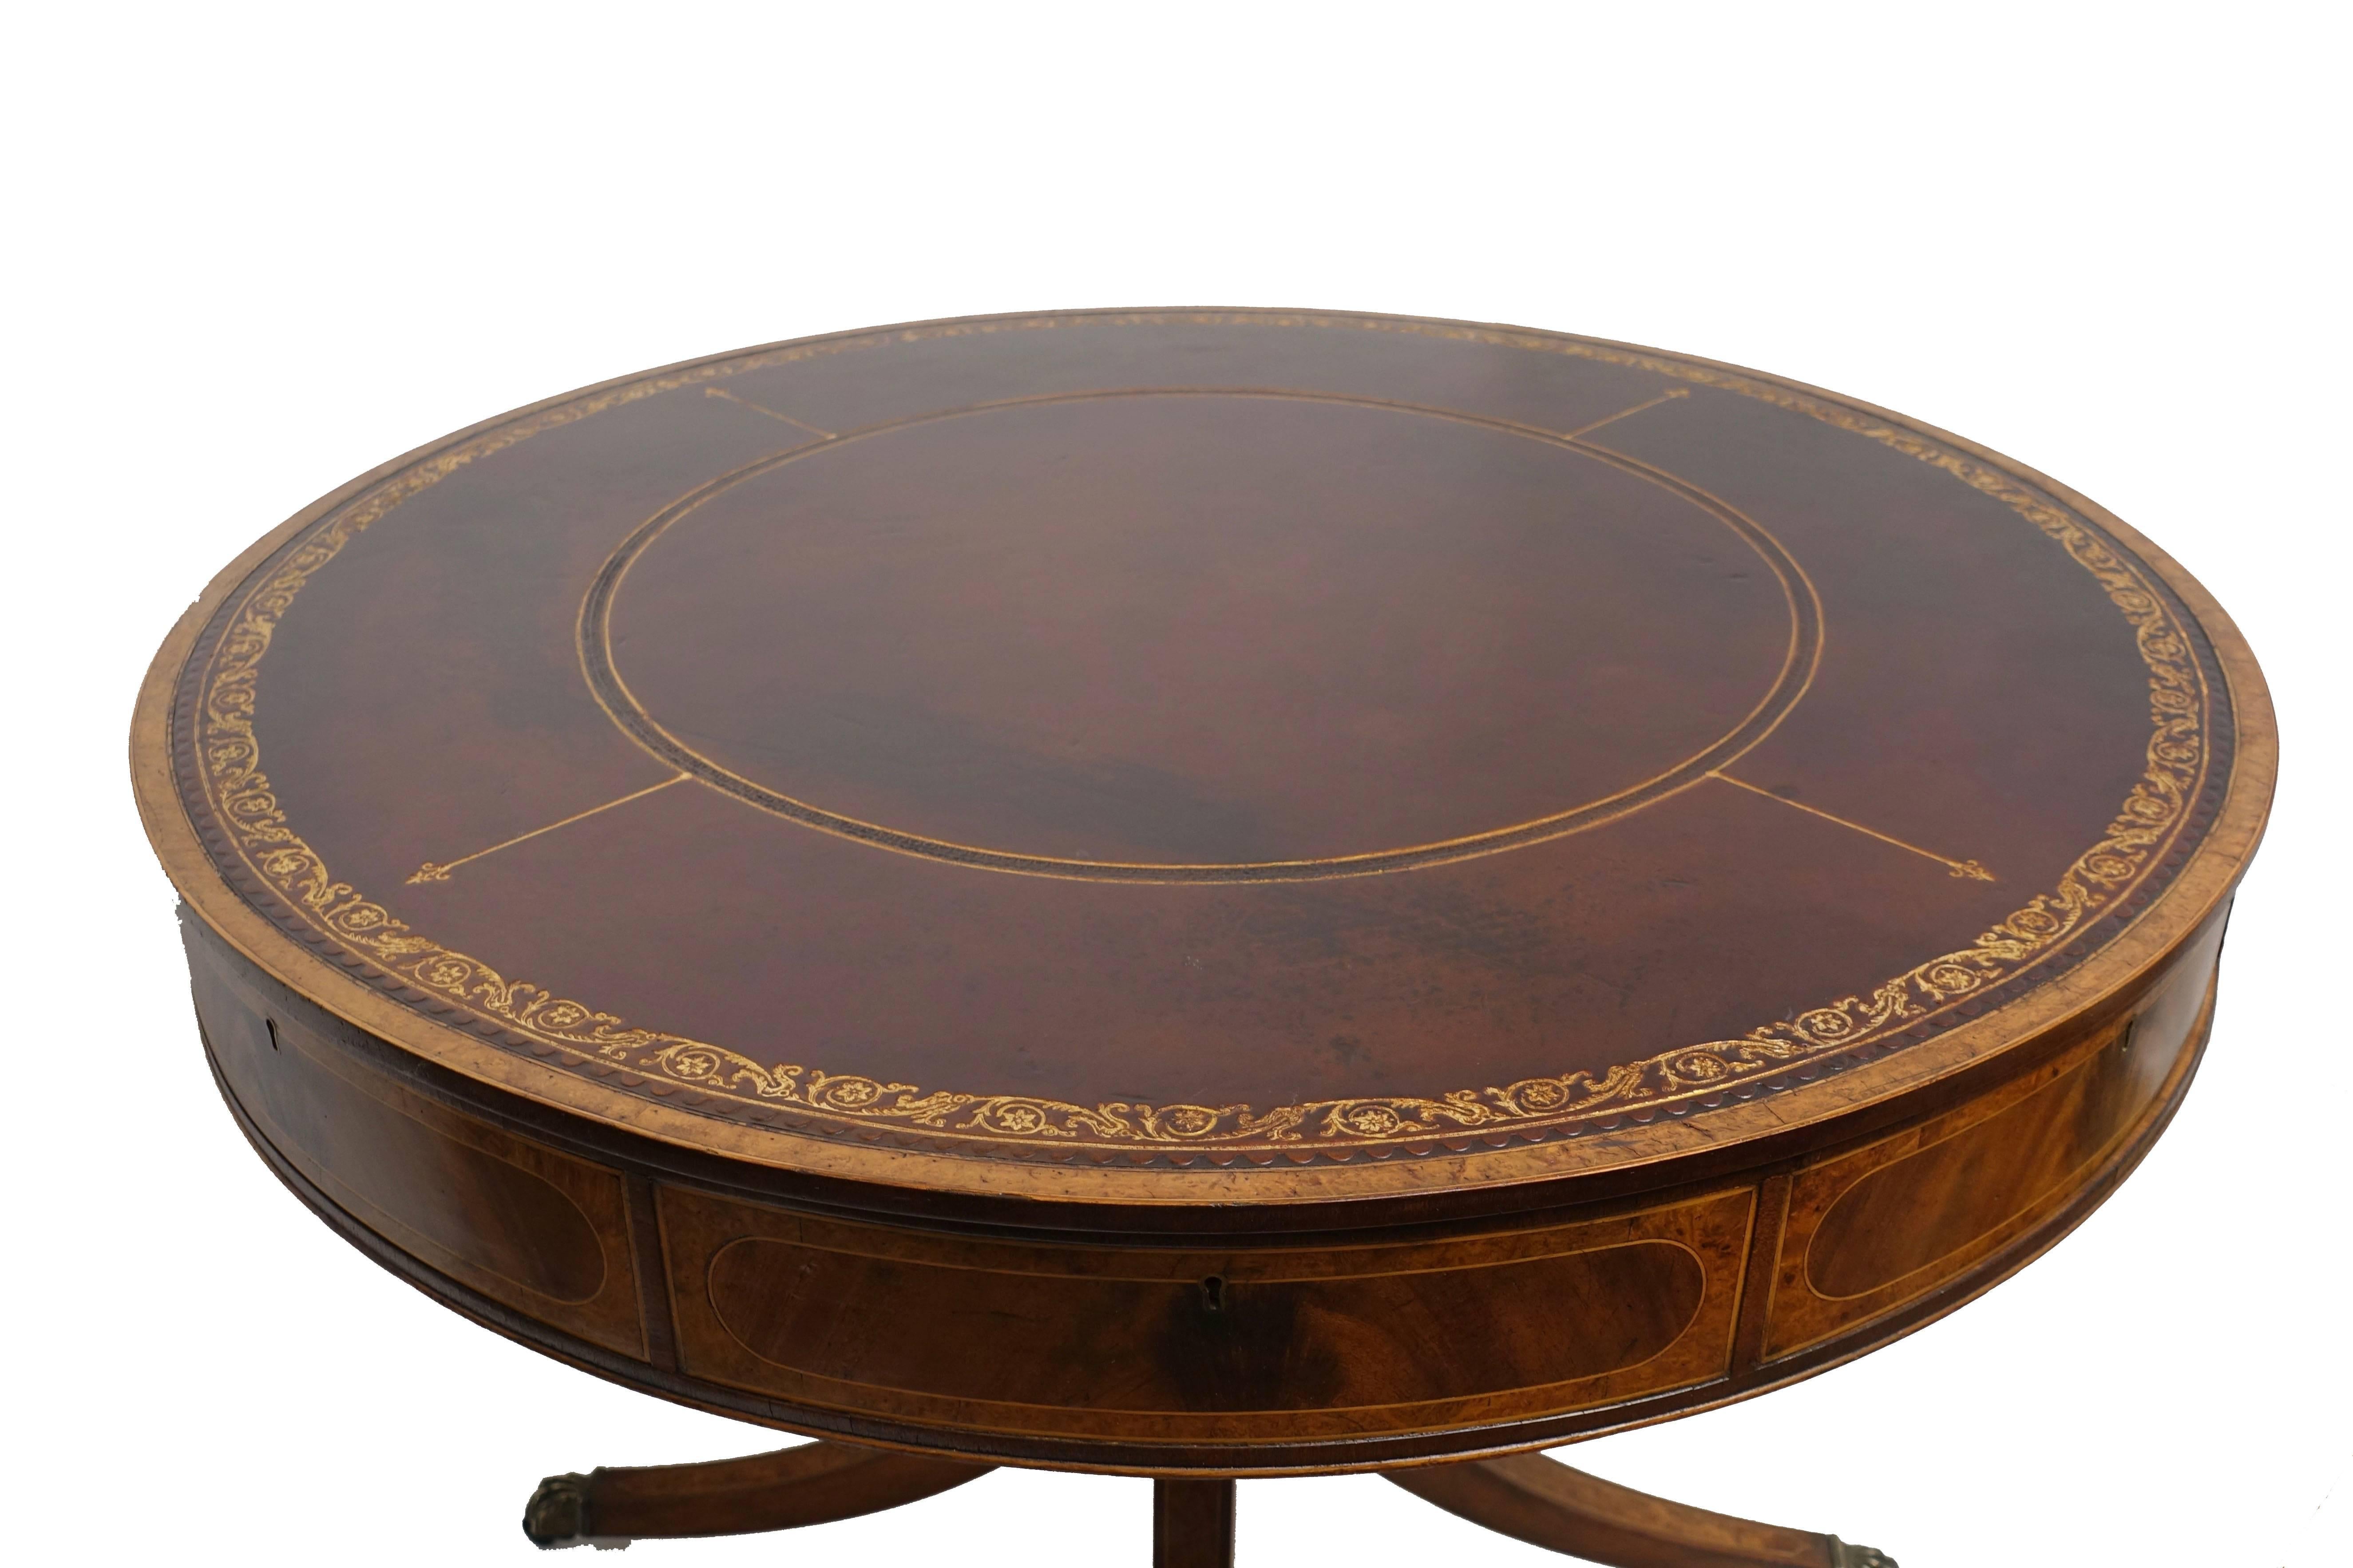 Handmade mahogany rent table or library/centre table with original inset leather surface having hand tooled gilt edge detail. Table has four working drawers and four blind drawers, standing on an elegant four legged pedestal base. Recently